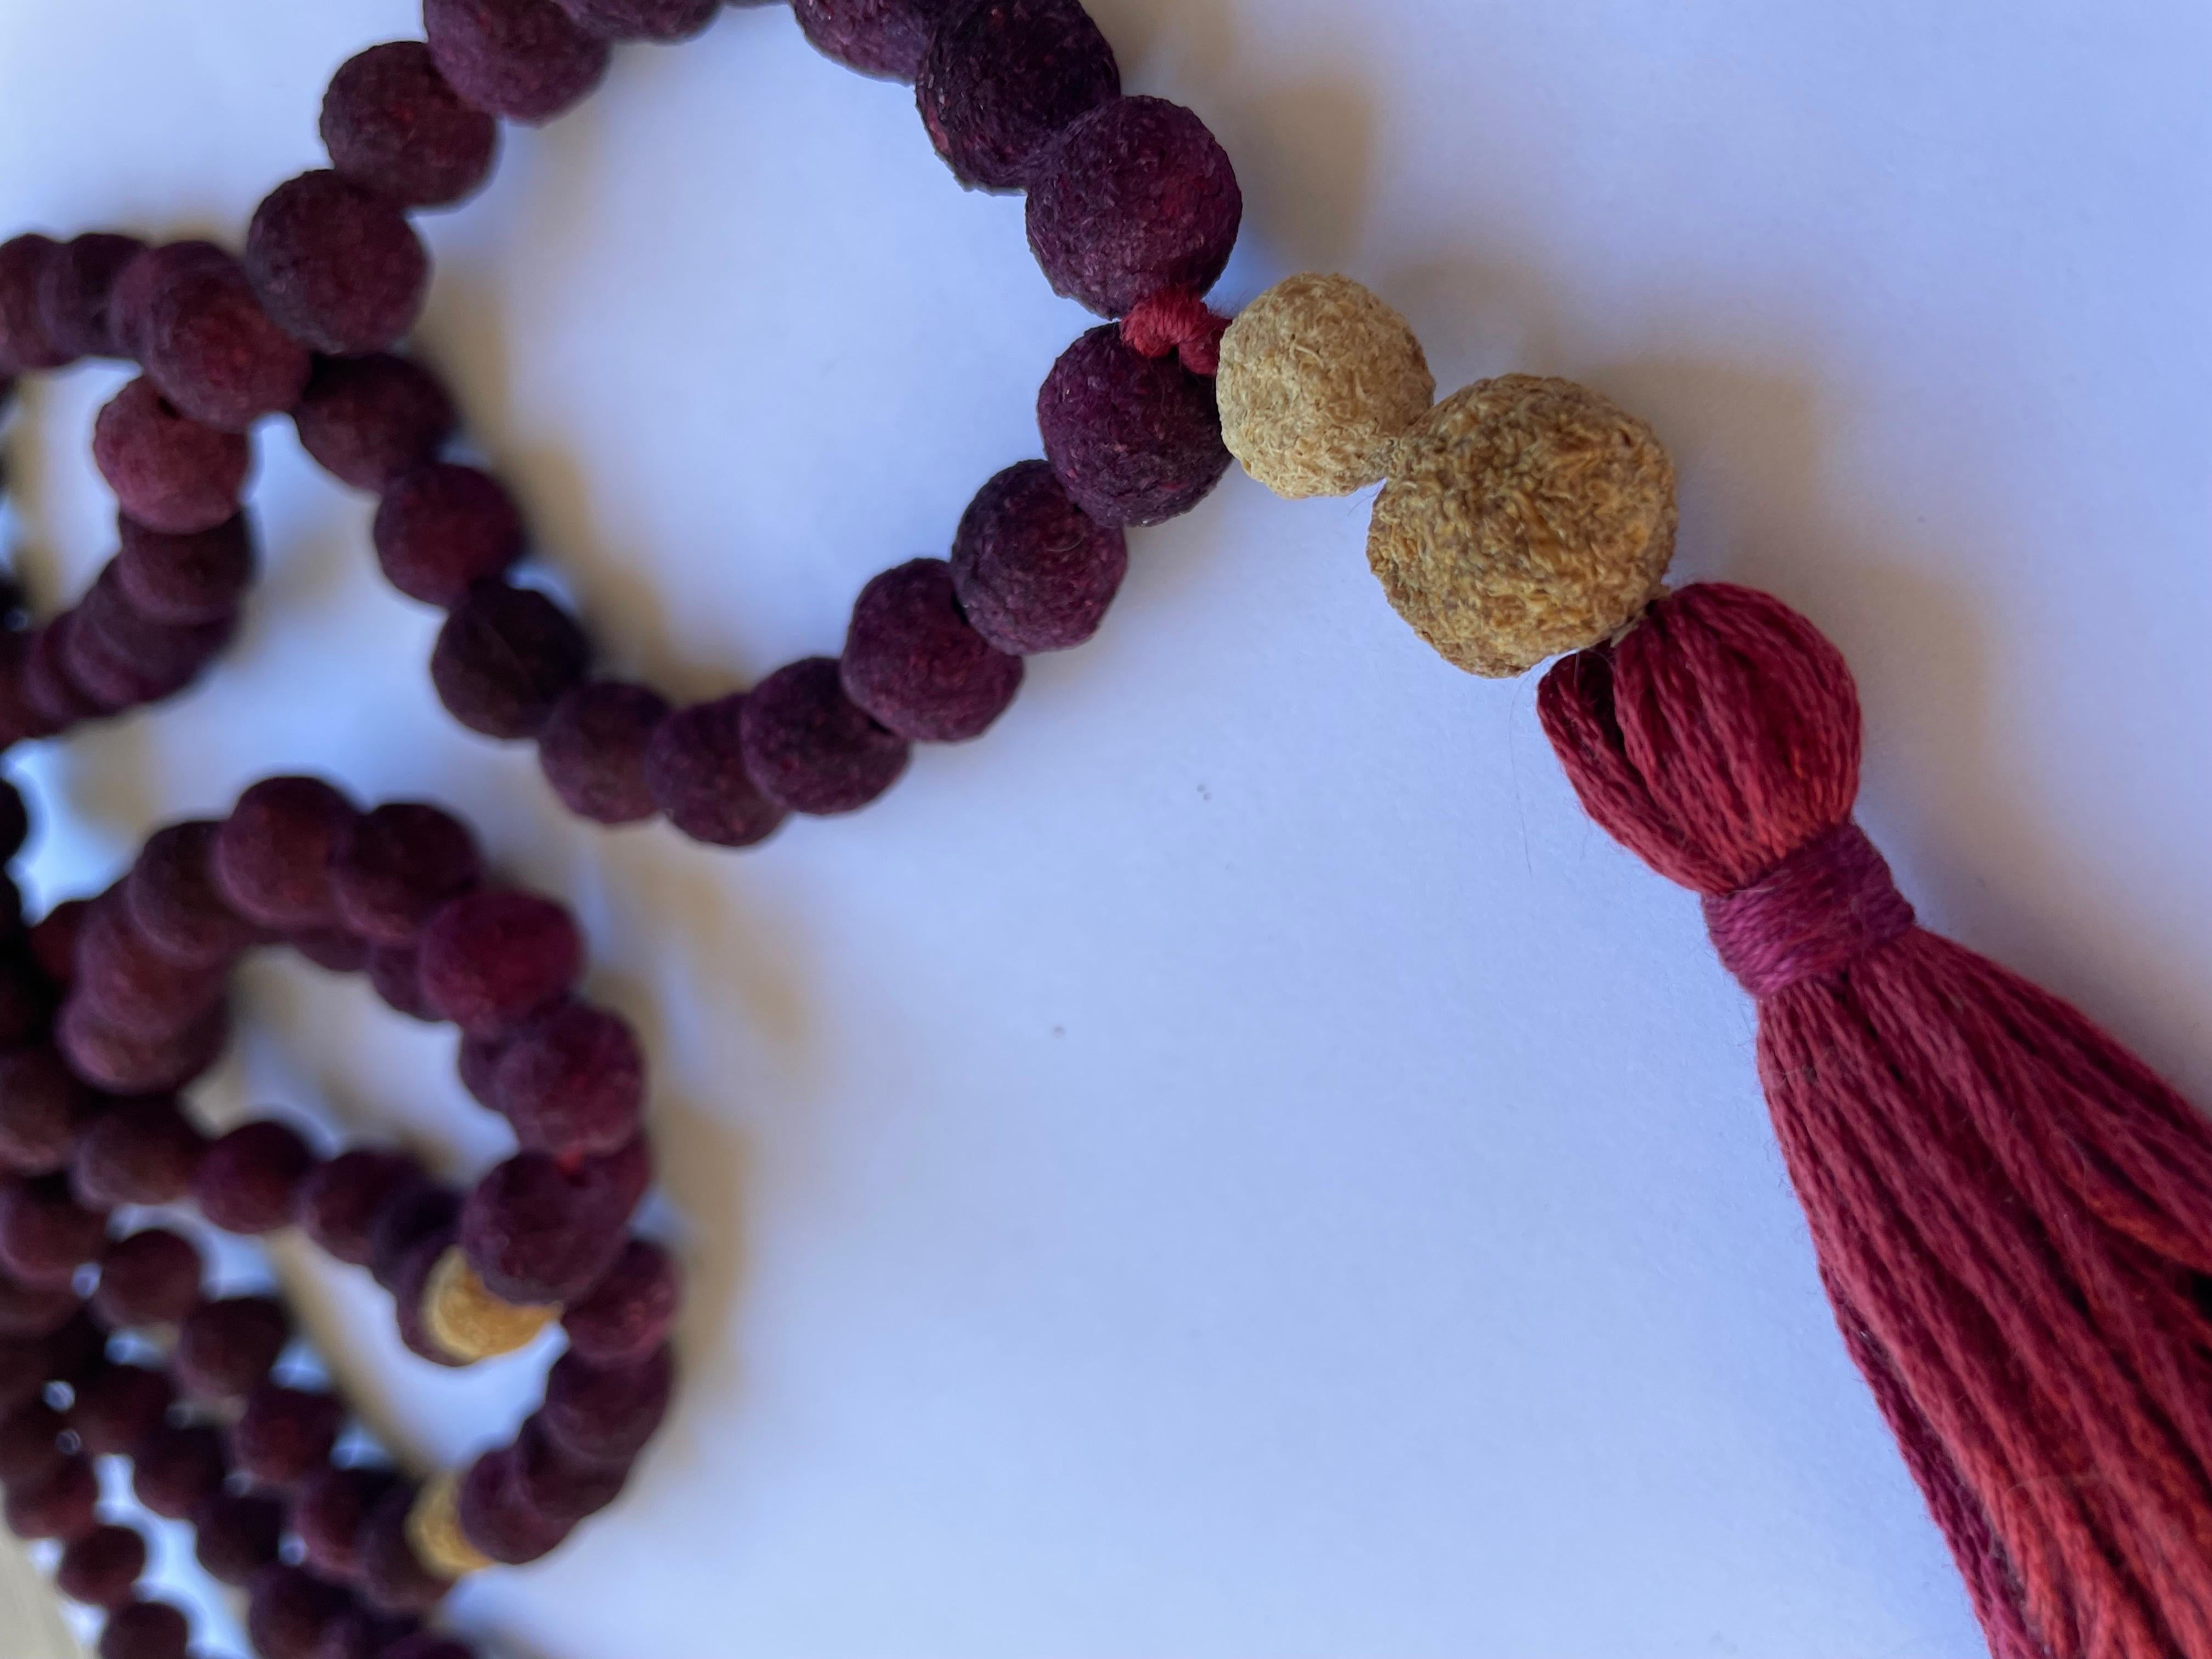 Red and white roses were used to creat this 108 Rose Petal Bead Mala. No knots. Organic cotton string and tassel.

Length 22”

Mala’s or Tibetan Buddhist prayer beads are similar to other prayer beads used in various world regions.  Some people have